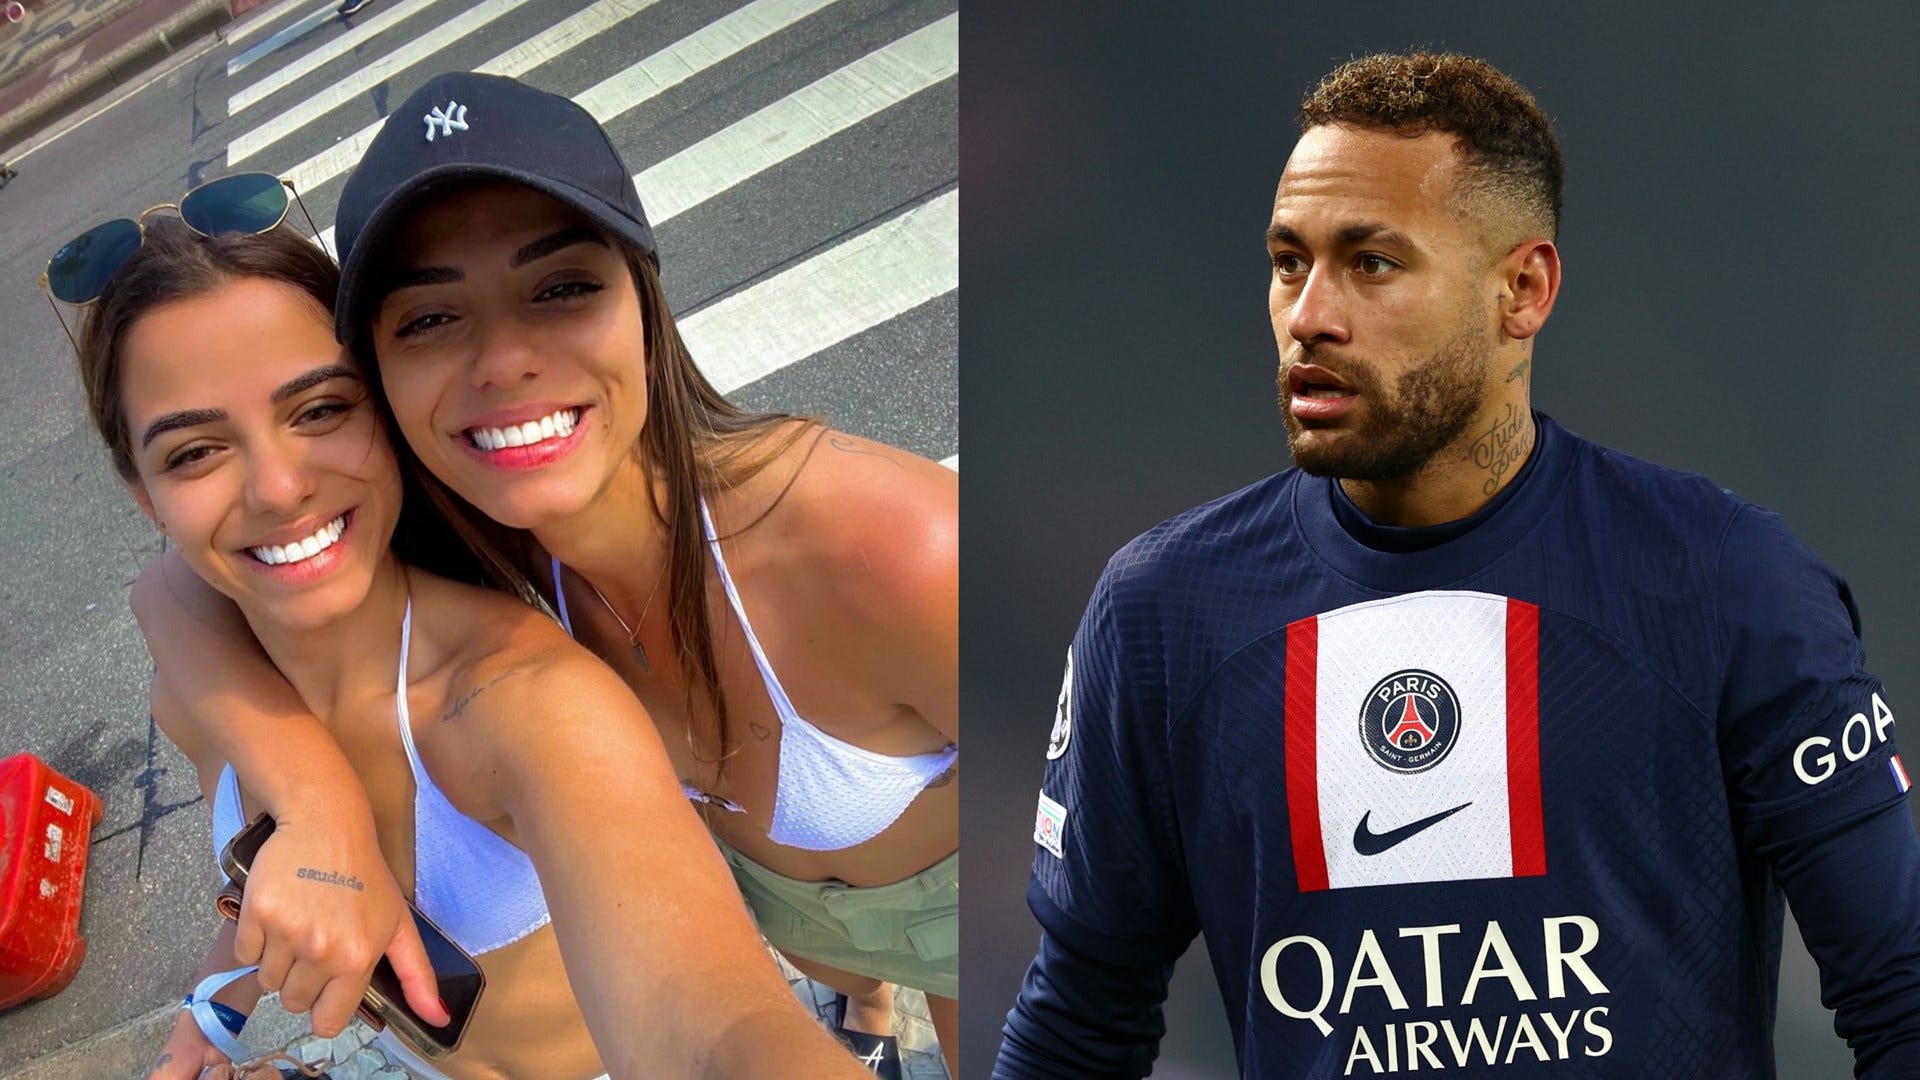 Neymar asked for sex with both of